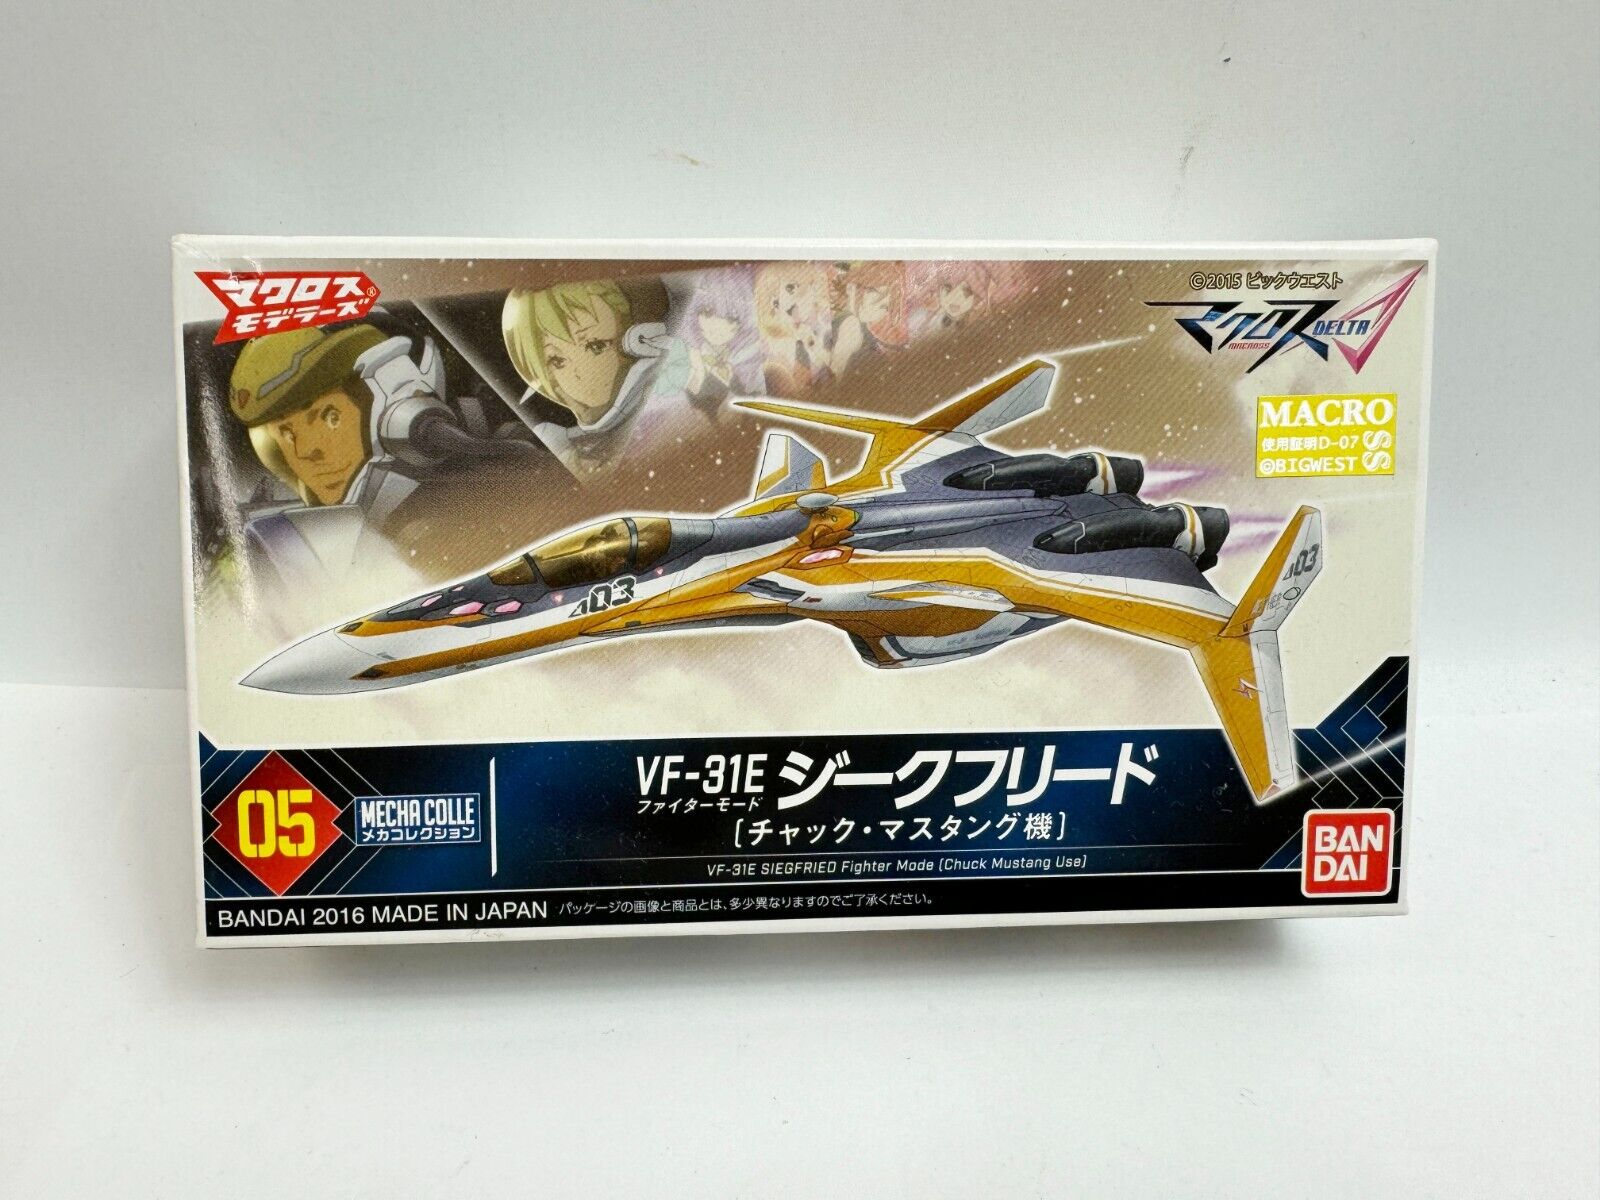 AUTH BOXED NEW VF-31E SIEGFRIED CHUCK MUSTANG USE MODEL KIT JAPAN